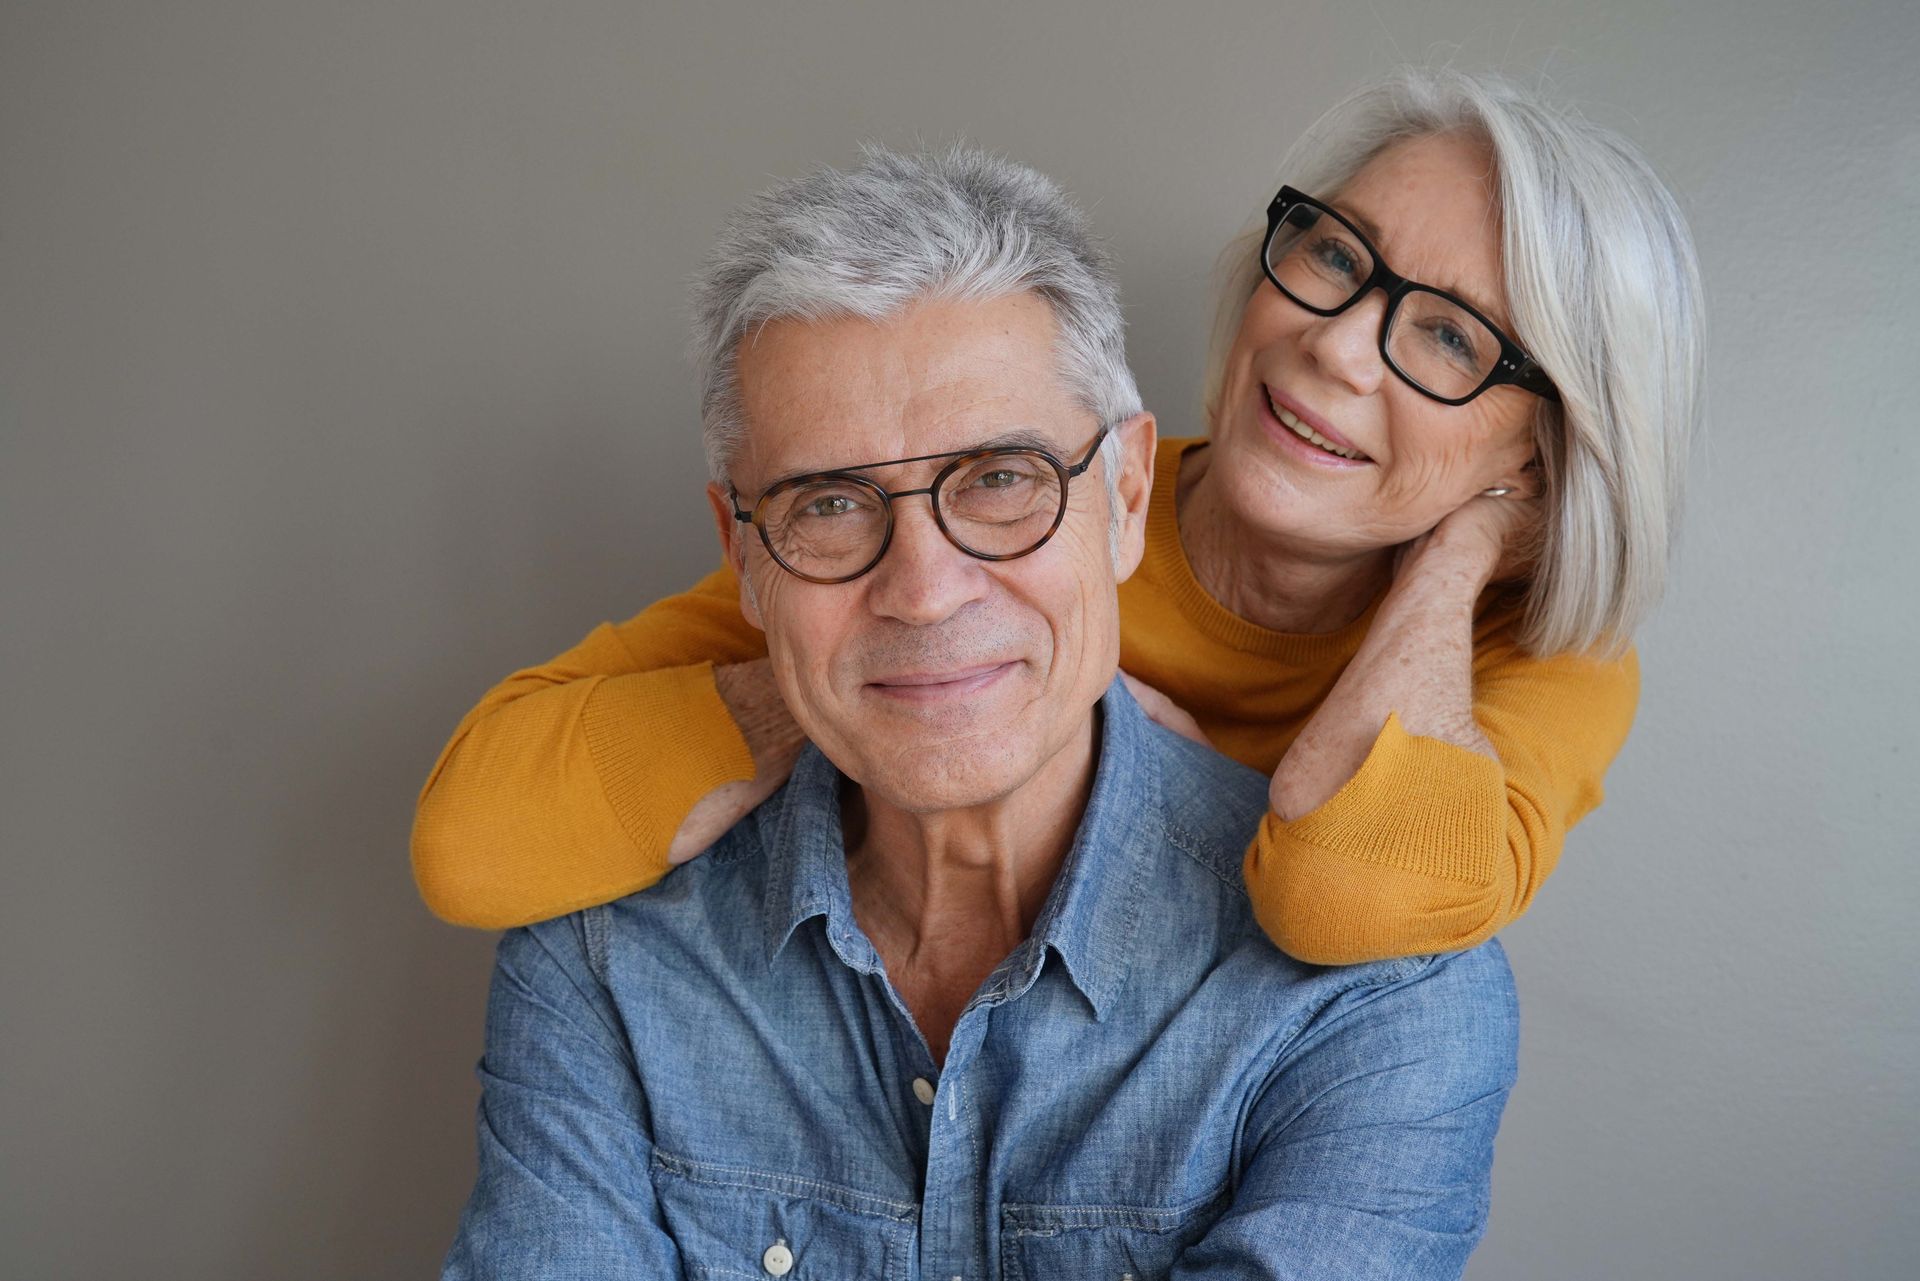 a man and woman wearing glasses are posing for a picture